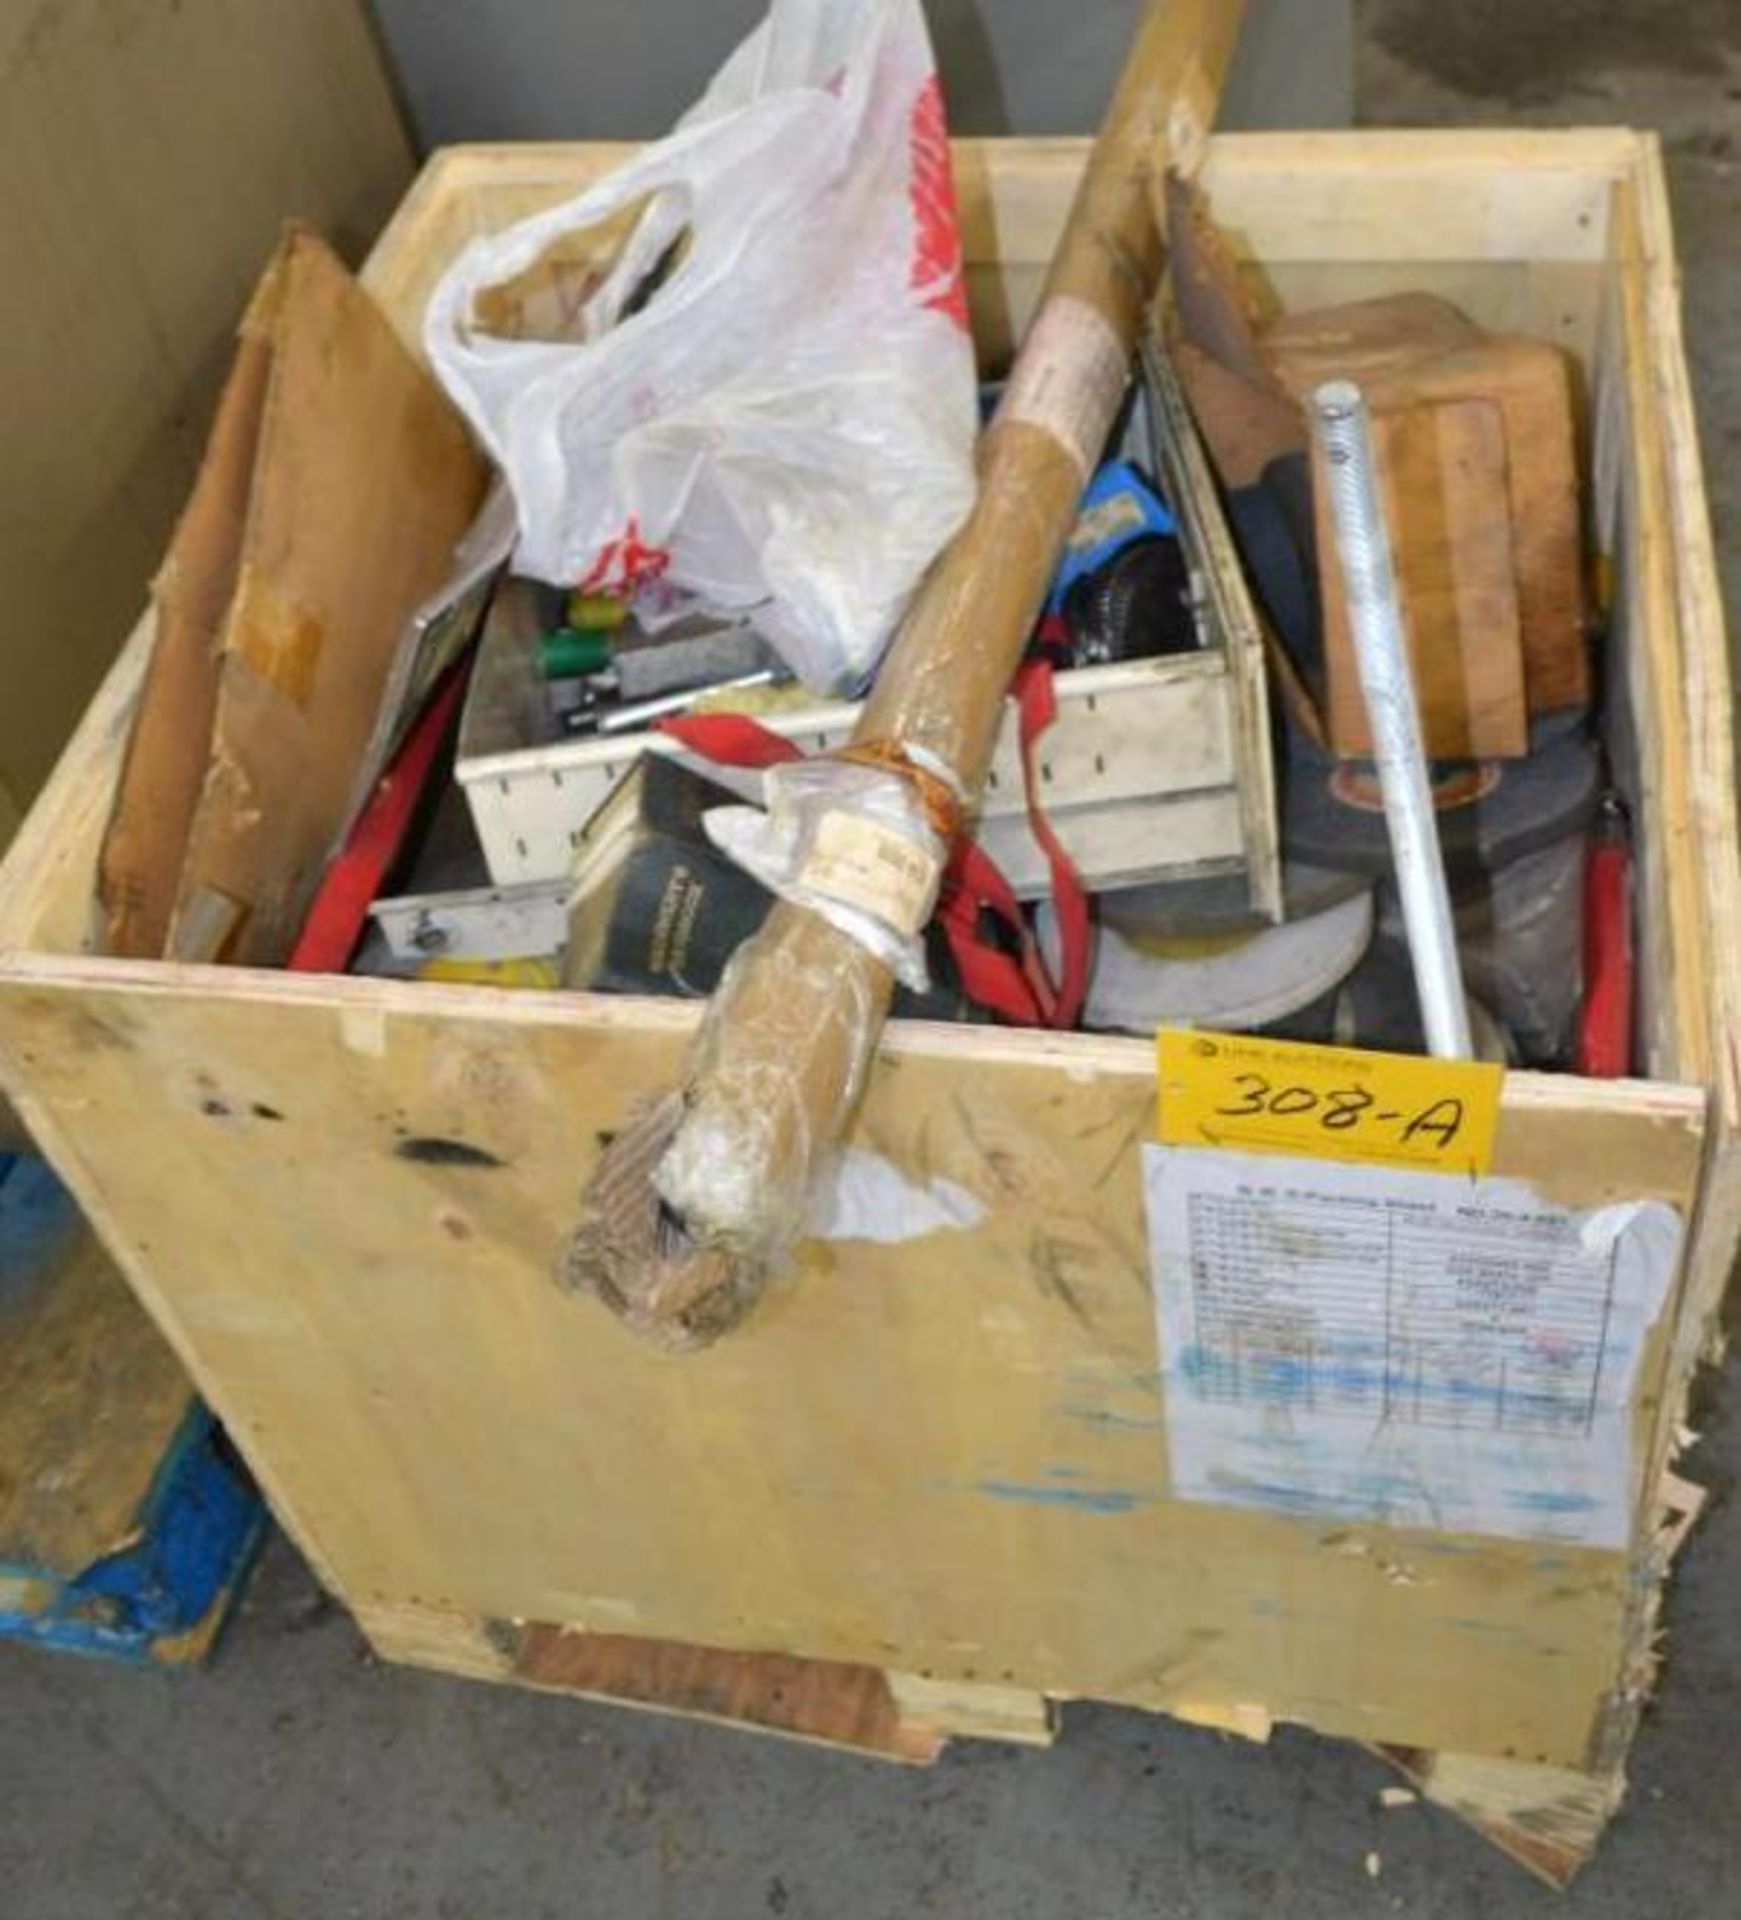 Lot Crate & Contents, (2) File Cabinets & Contents, (1) Skid Misc., (1) Steel Bench Frame - Image 2 of 10